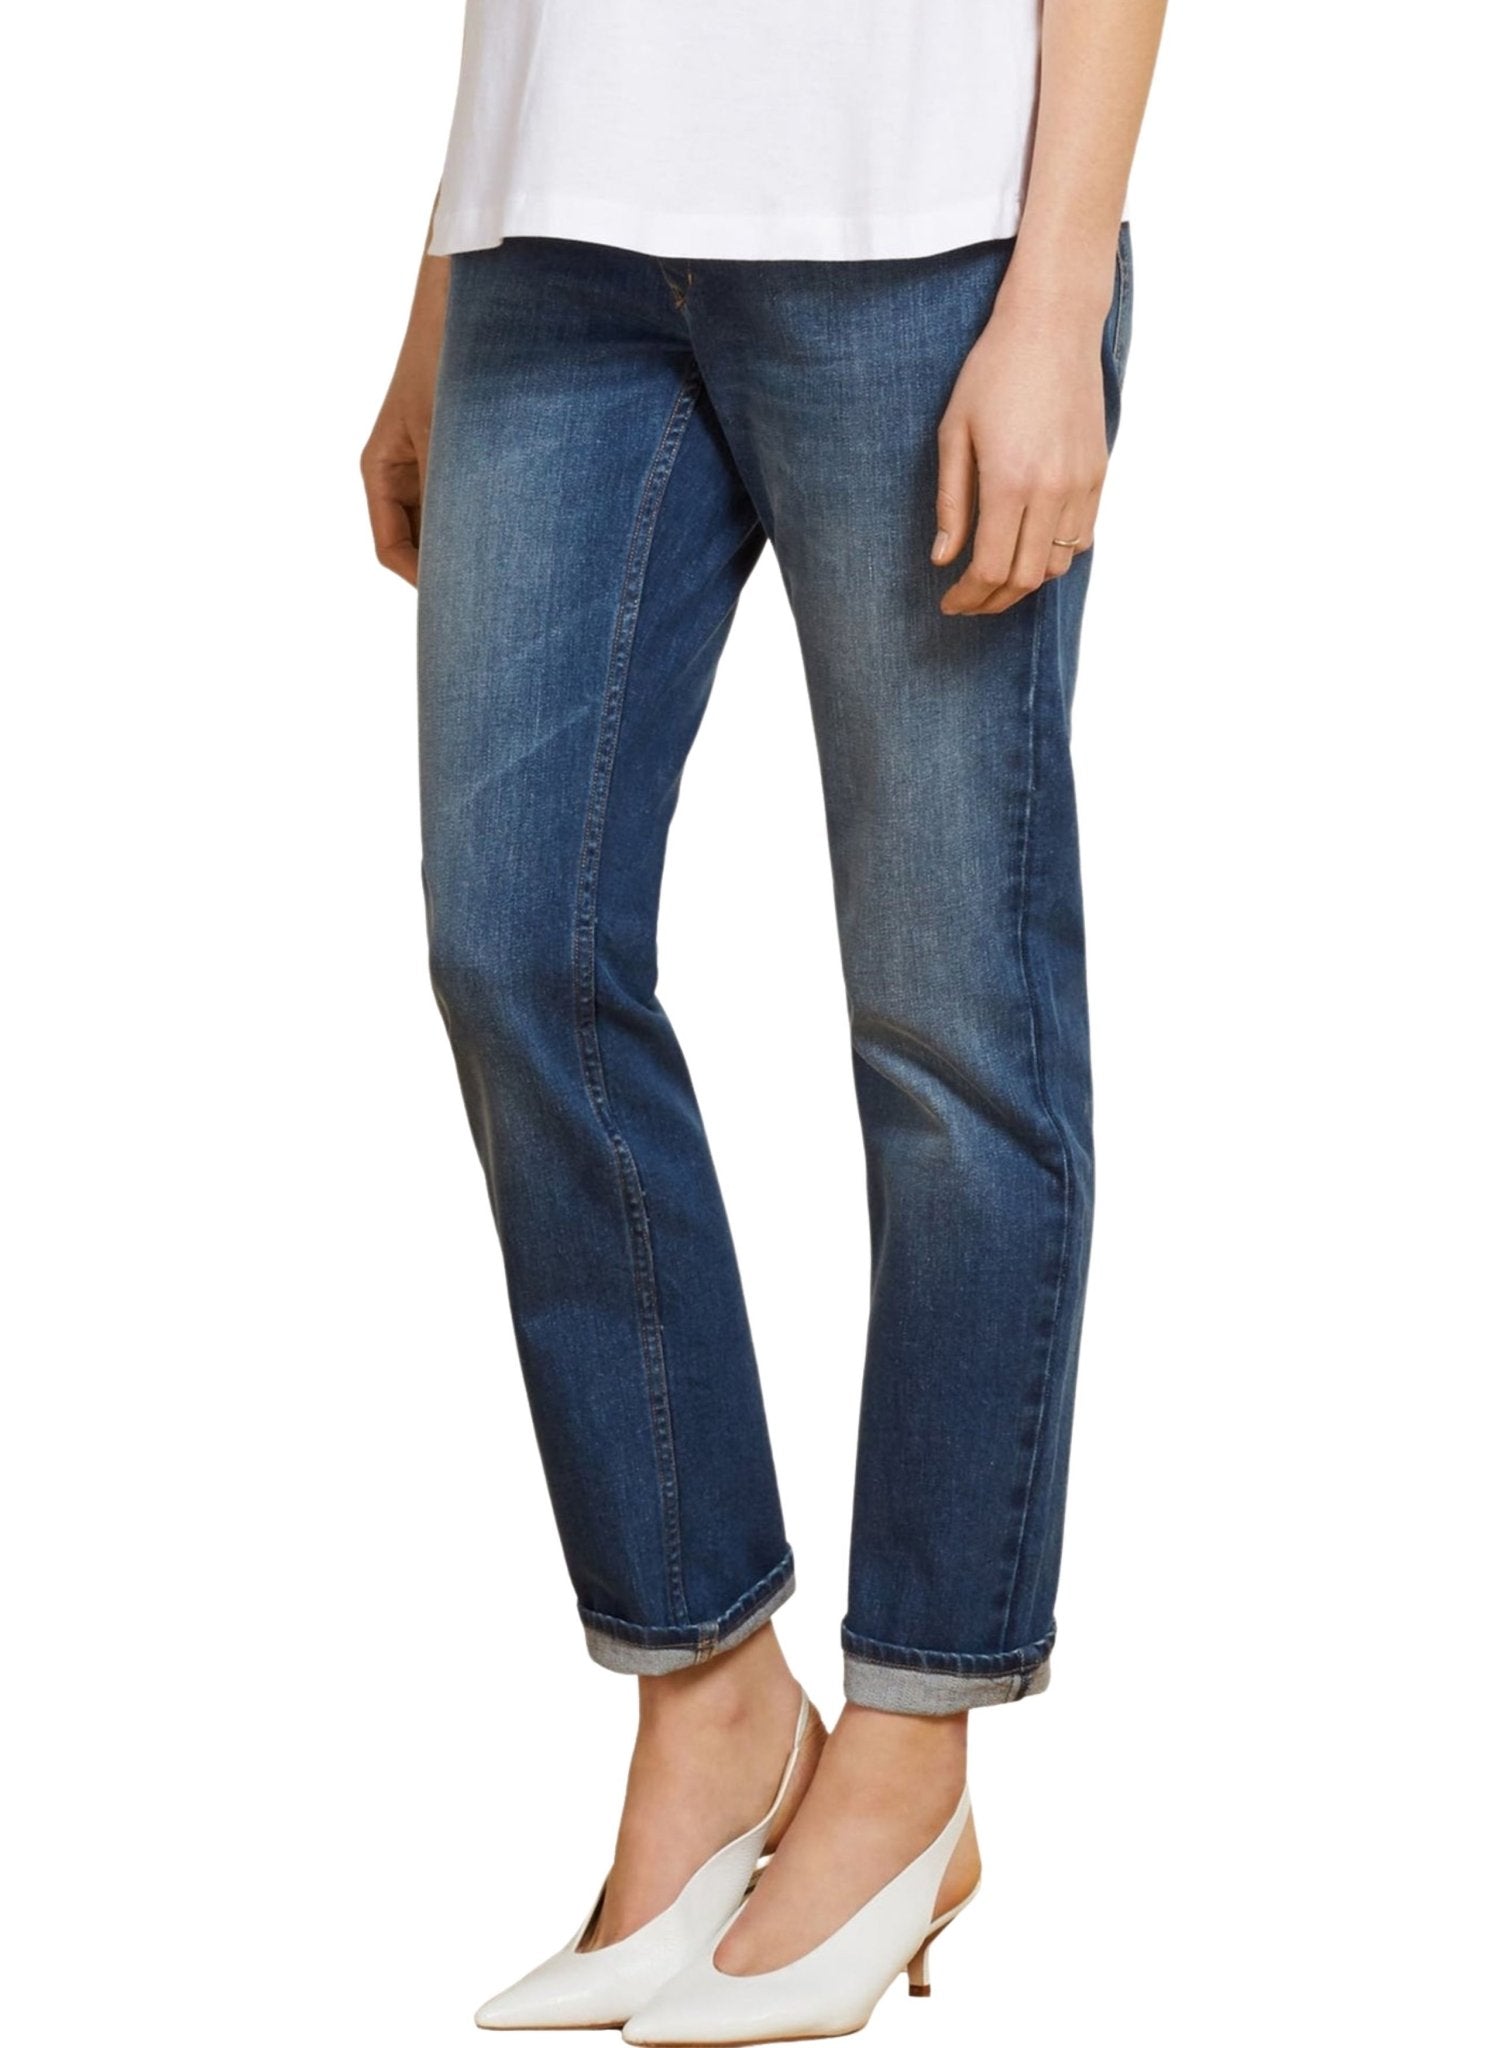 Over the Bump Maternity Relaxed Jeans - Washed Indigo - Mums and Bumps